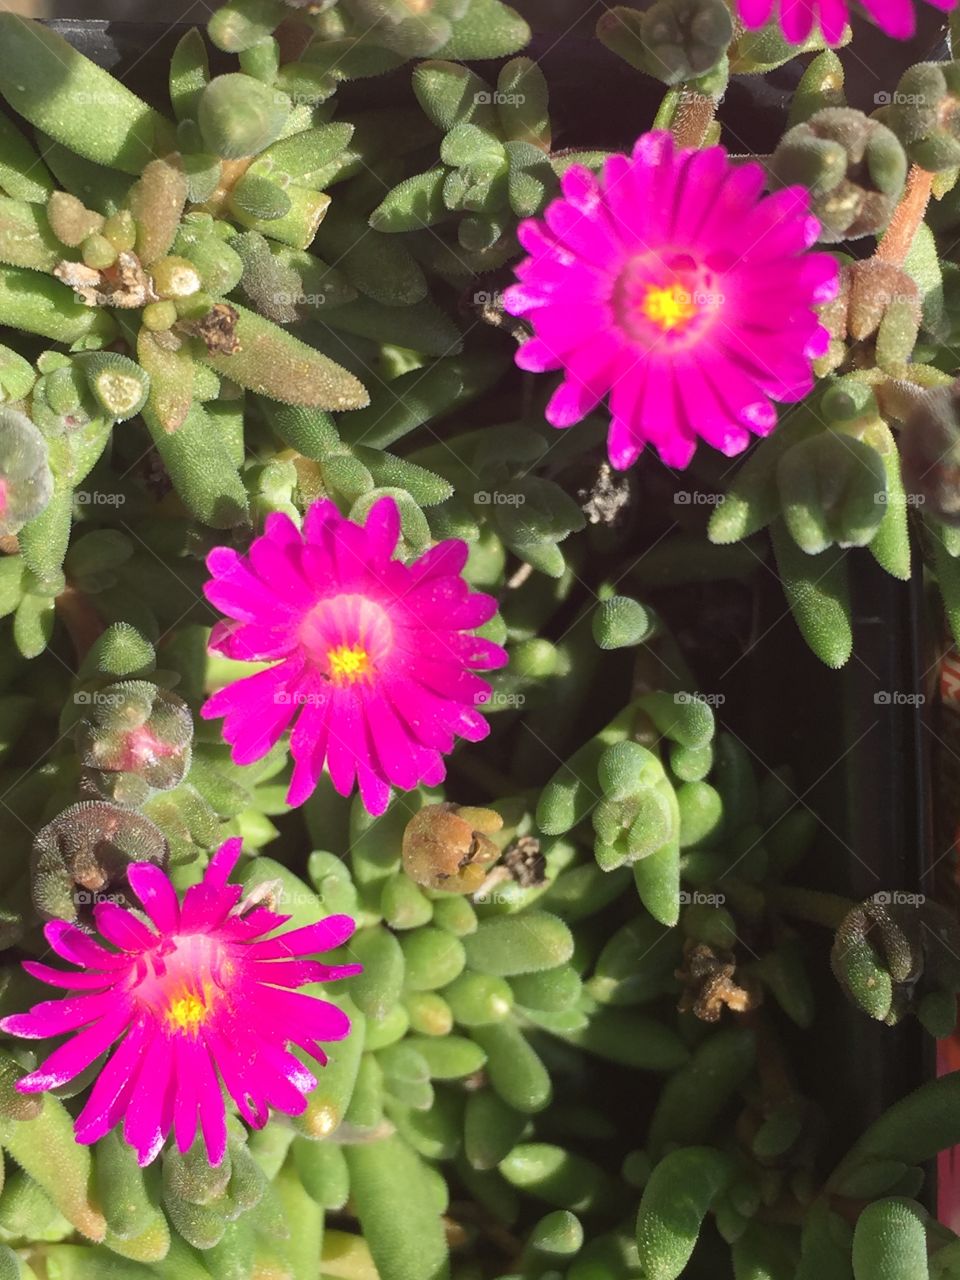 Pink flowers and cacti